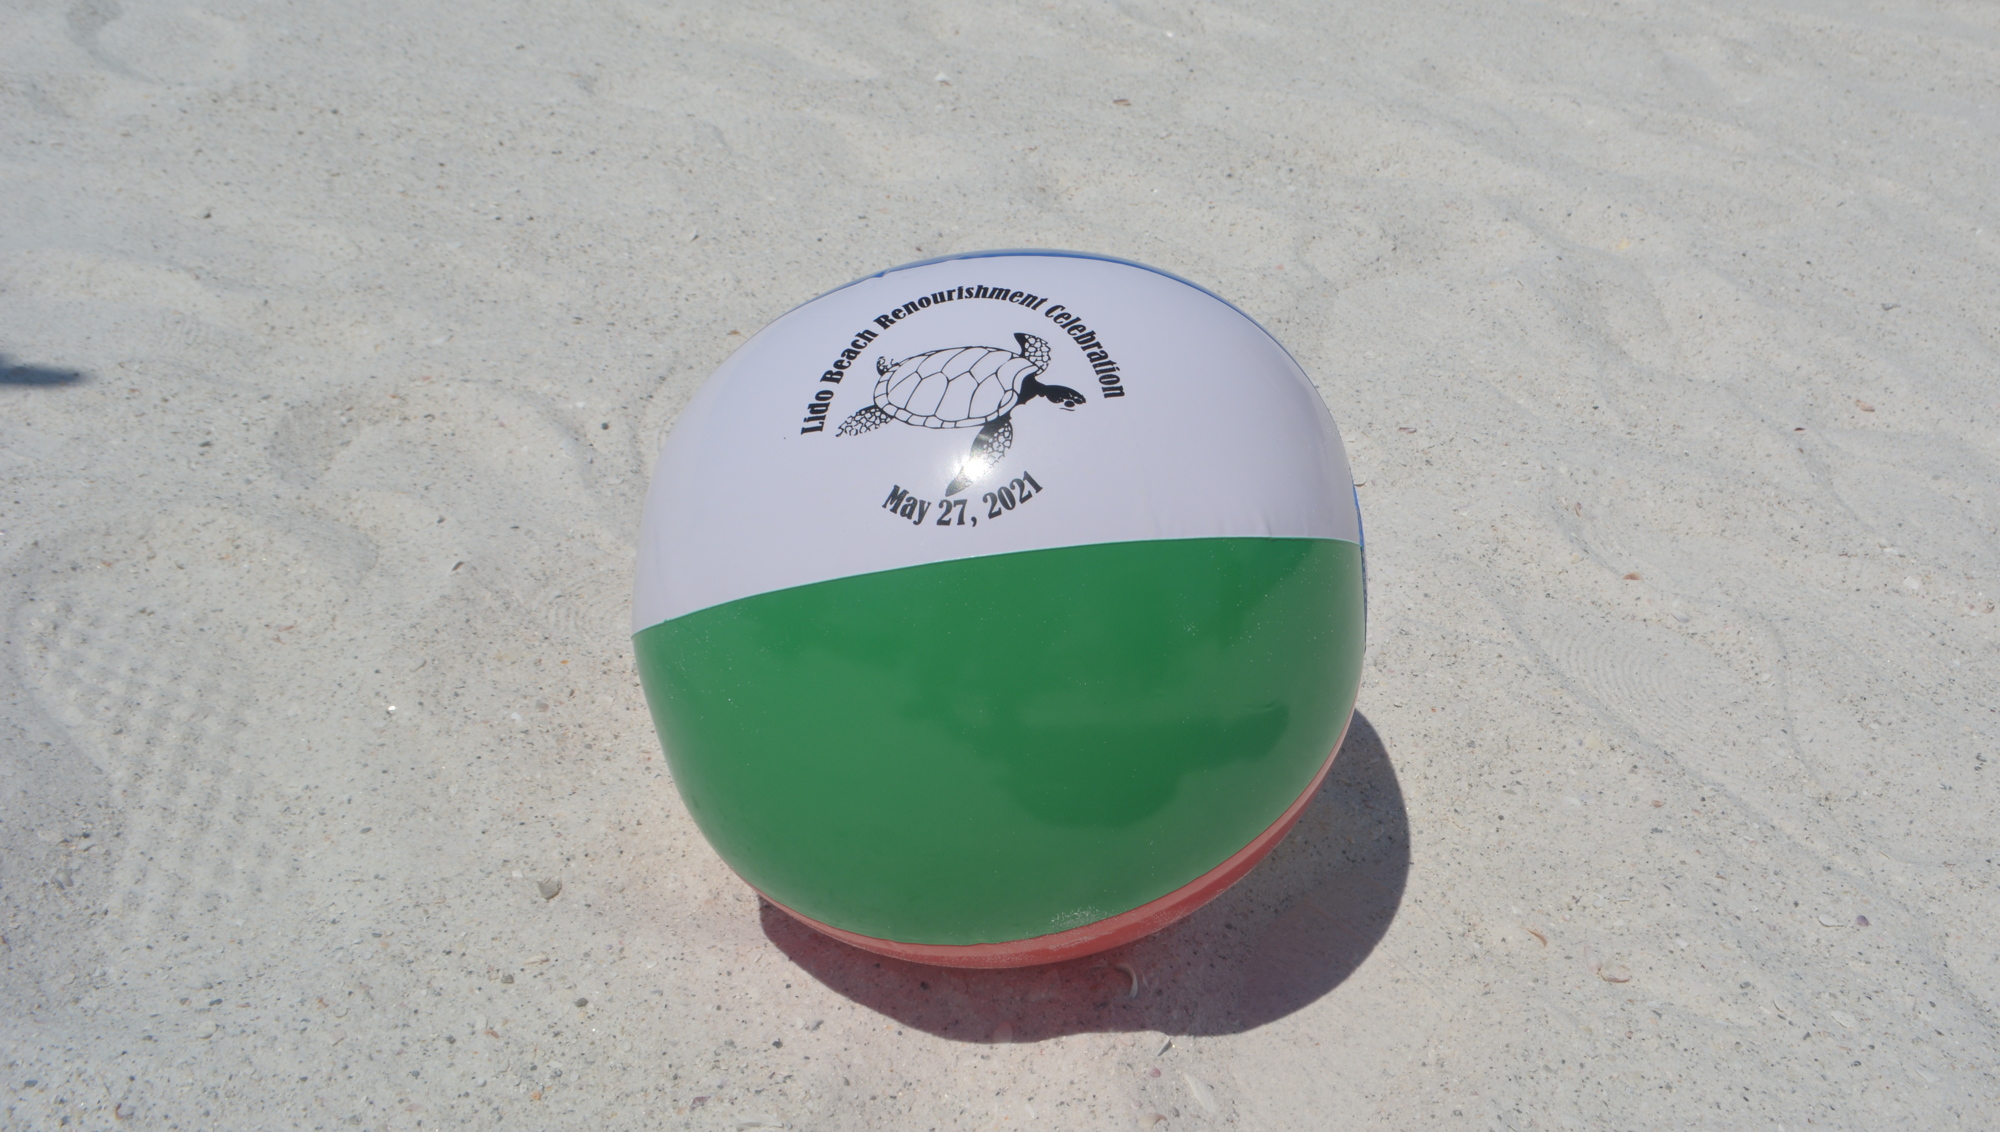 The city had branded beach balls on hand for the event.